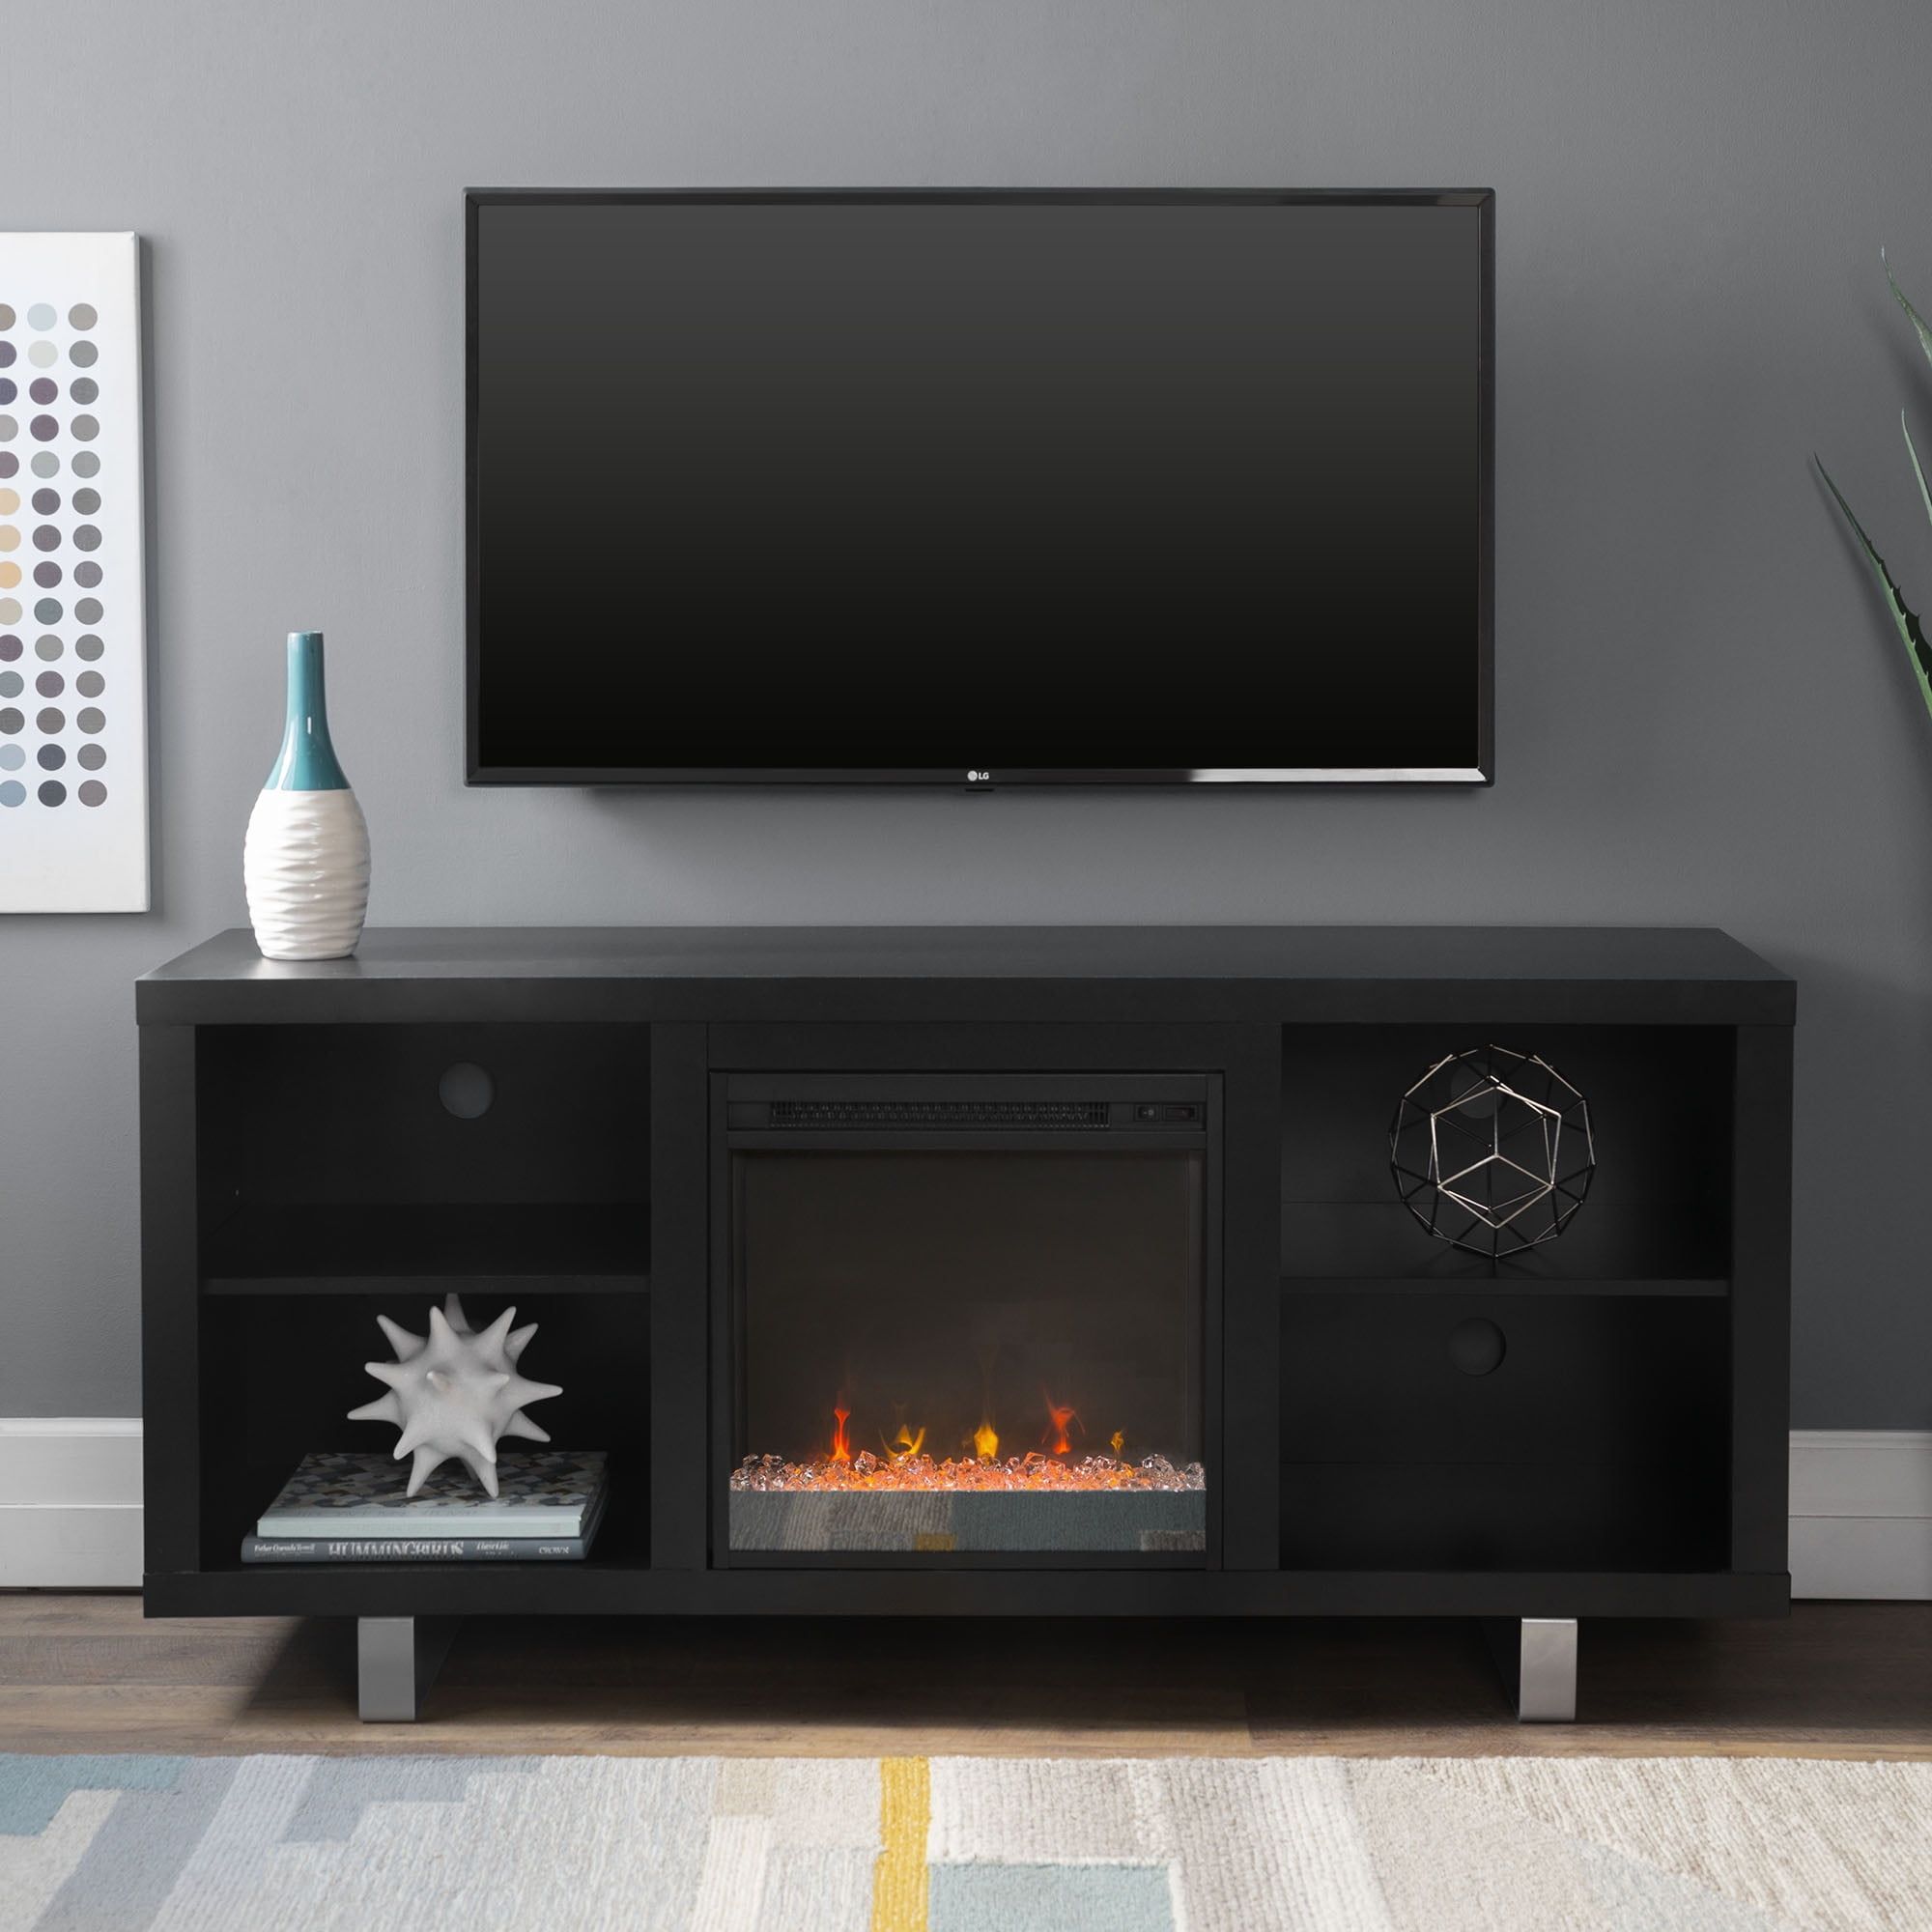 Manor Park Modern Fireplace Tv Stand For Tvs Up To 64?, Black For Modern Fireplace Tv Stands (Gallery 18 of 20)